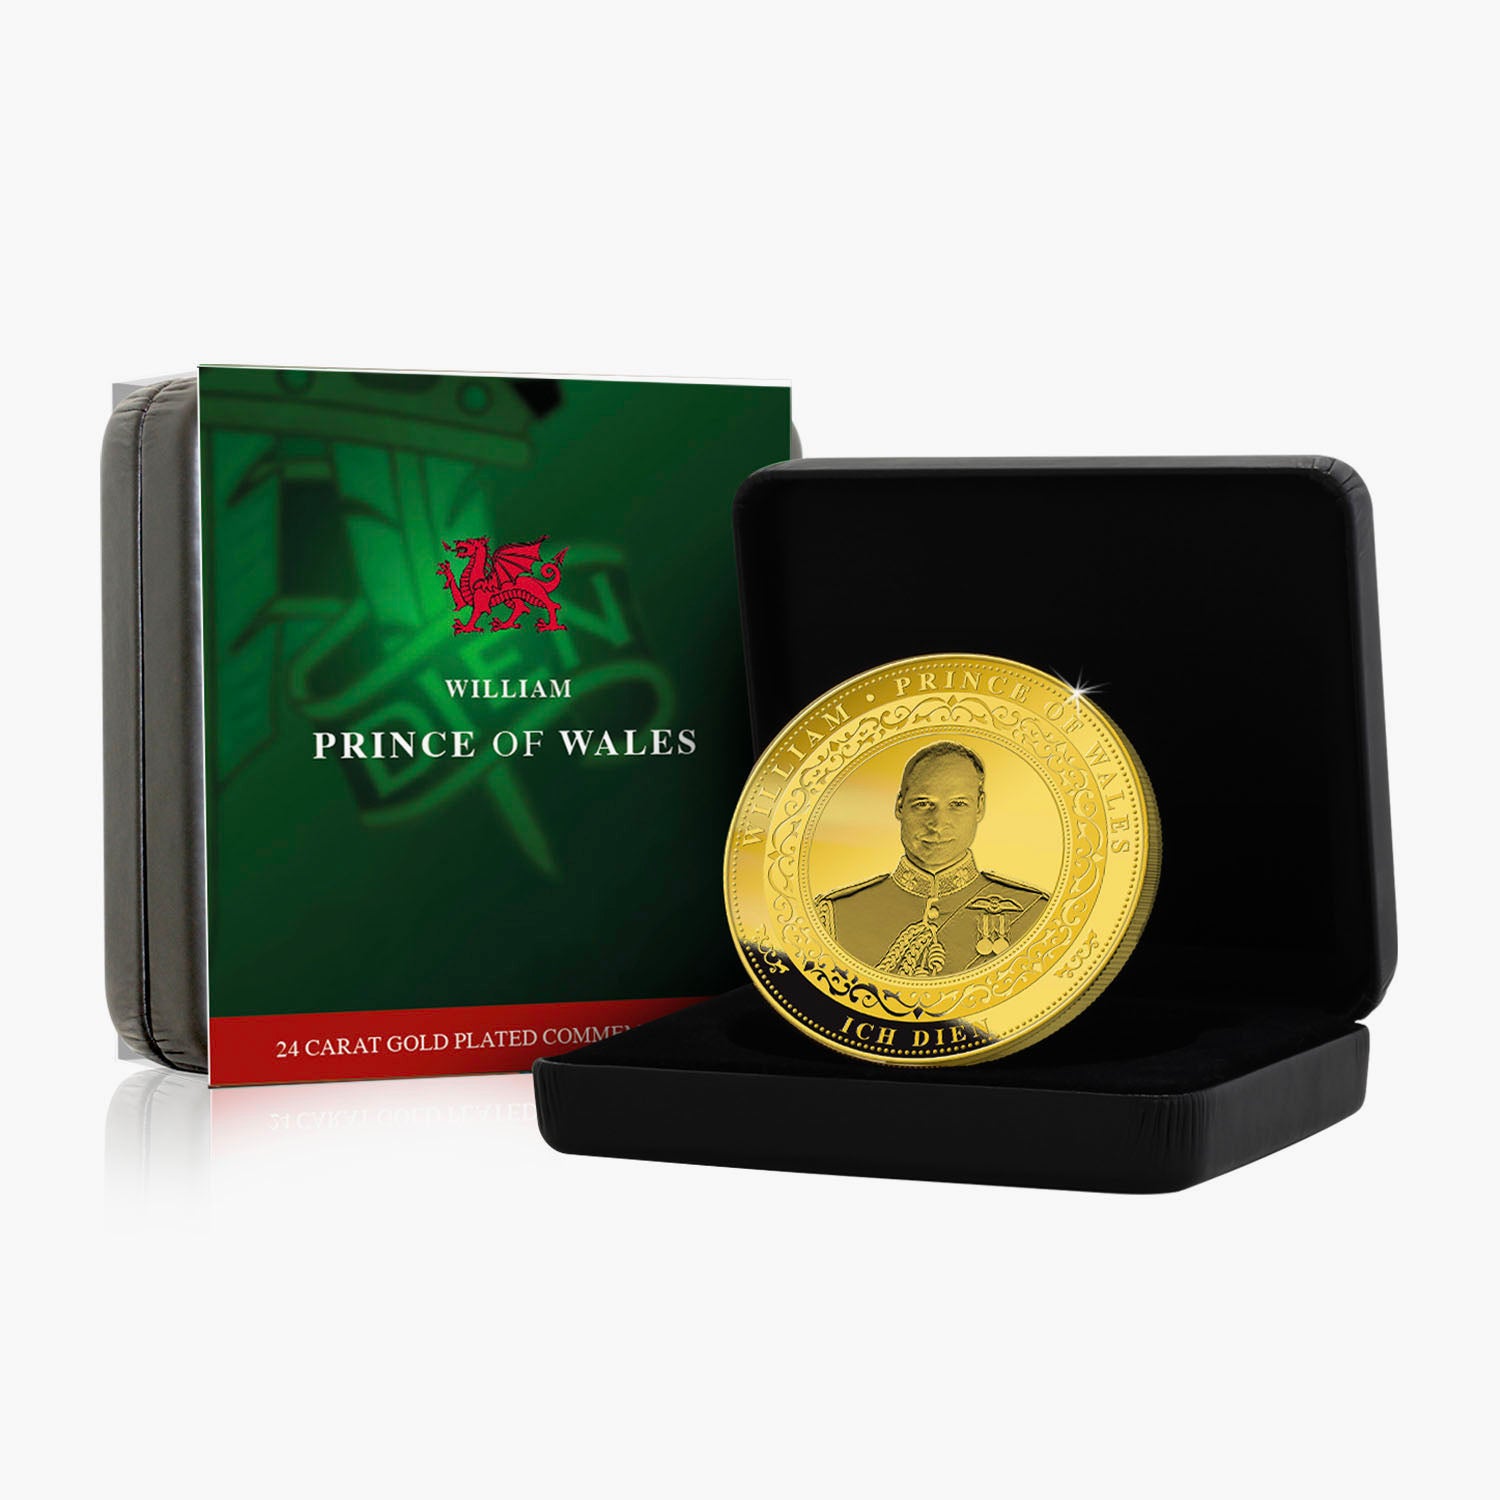 William - The Prince of Wales Gold Plated Commemorative